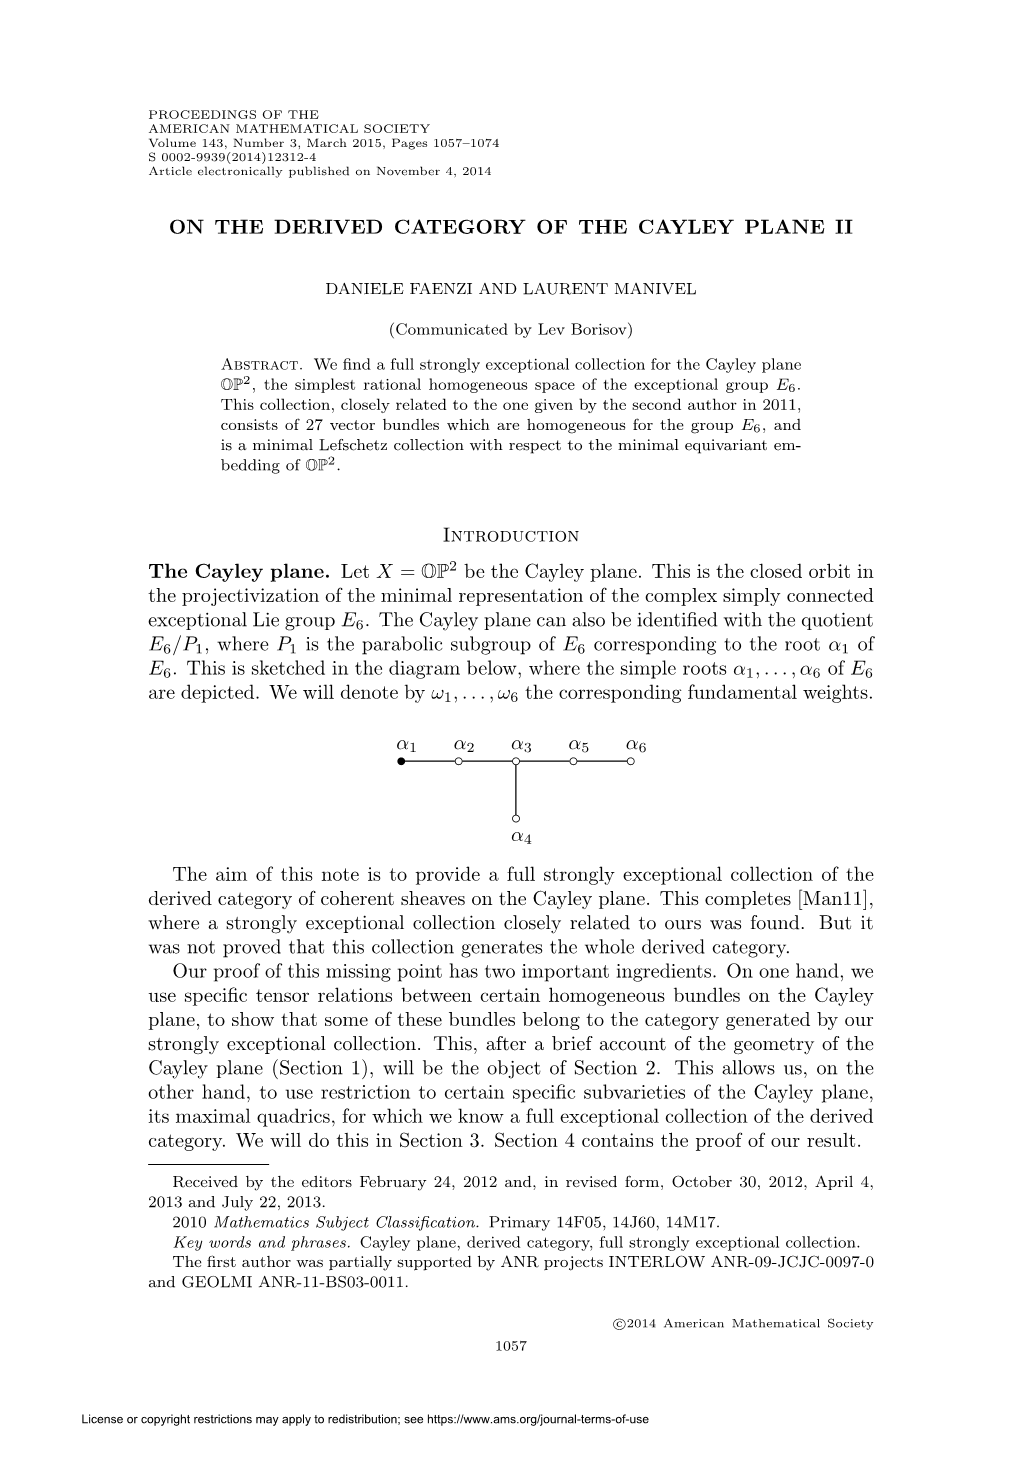 On the Derived Category of the Cayley Plane Ii